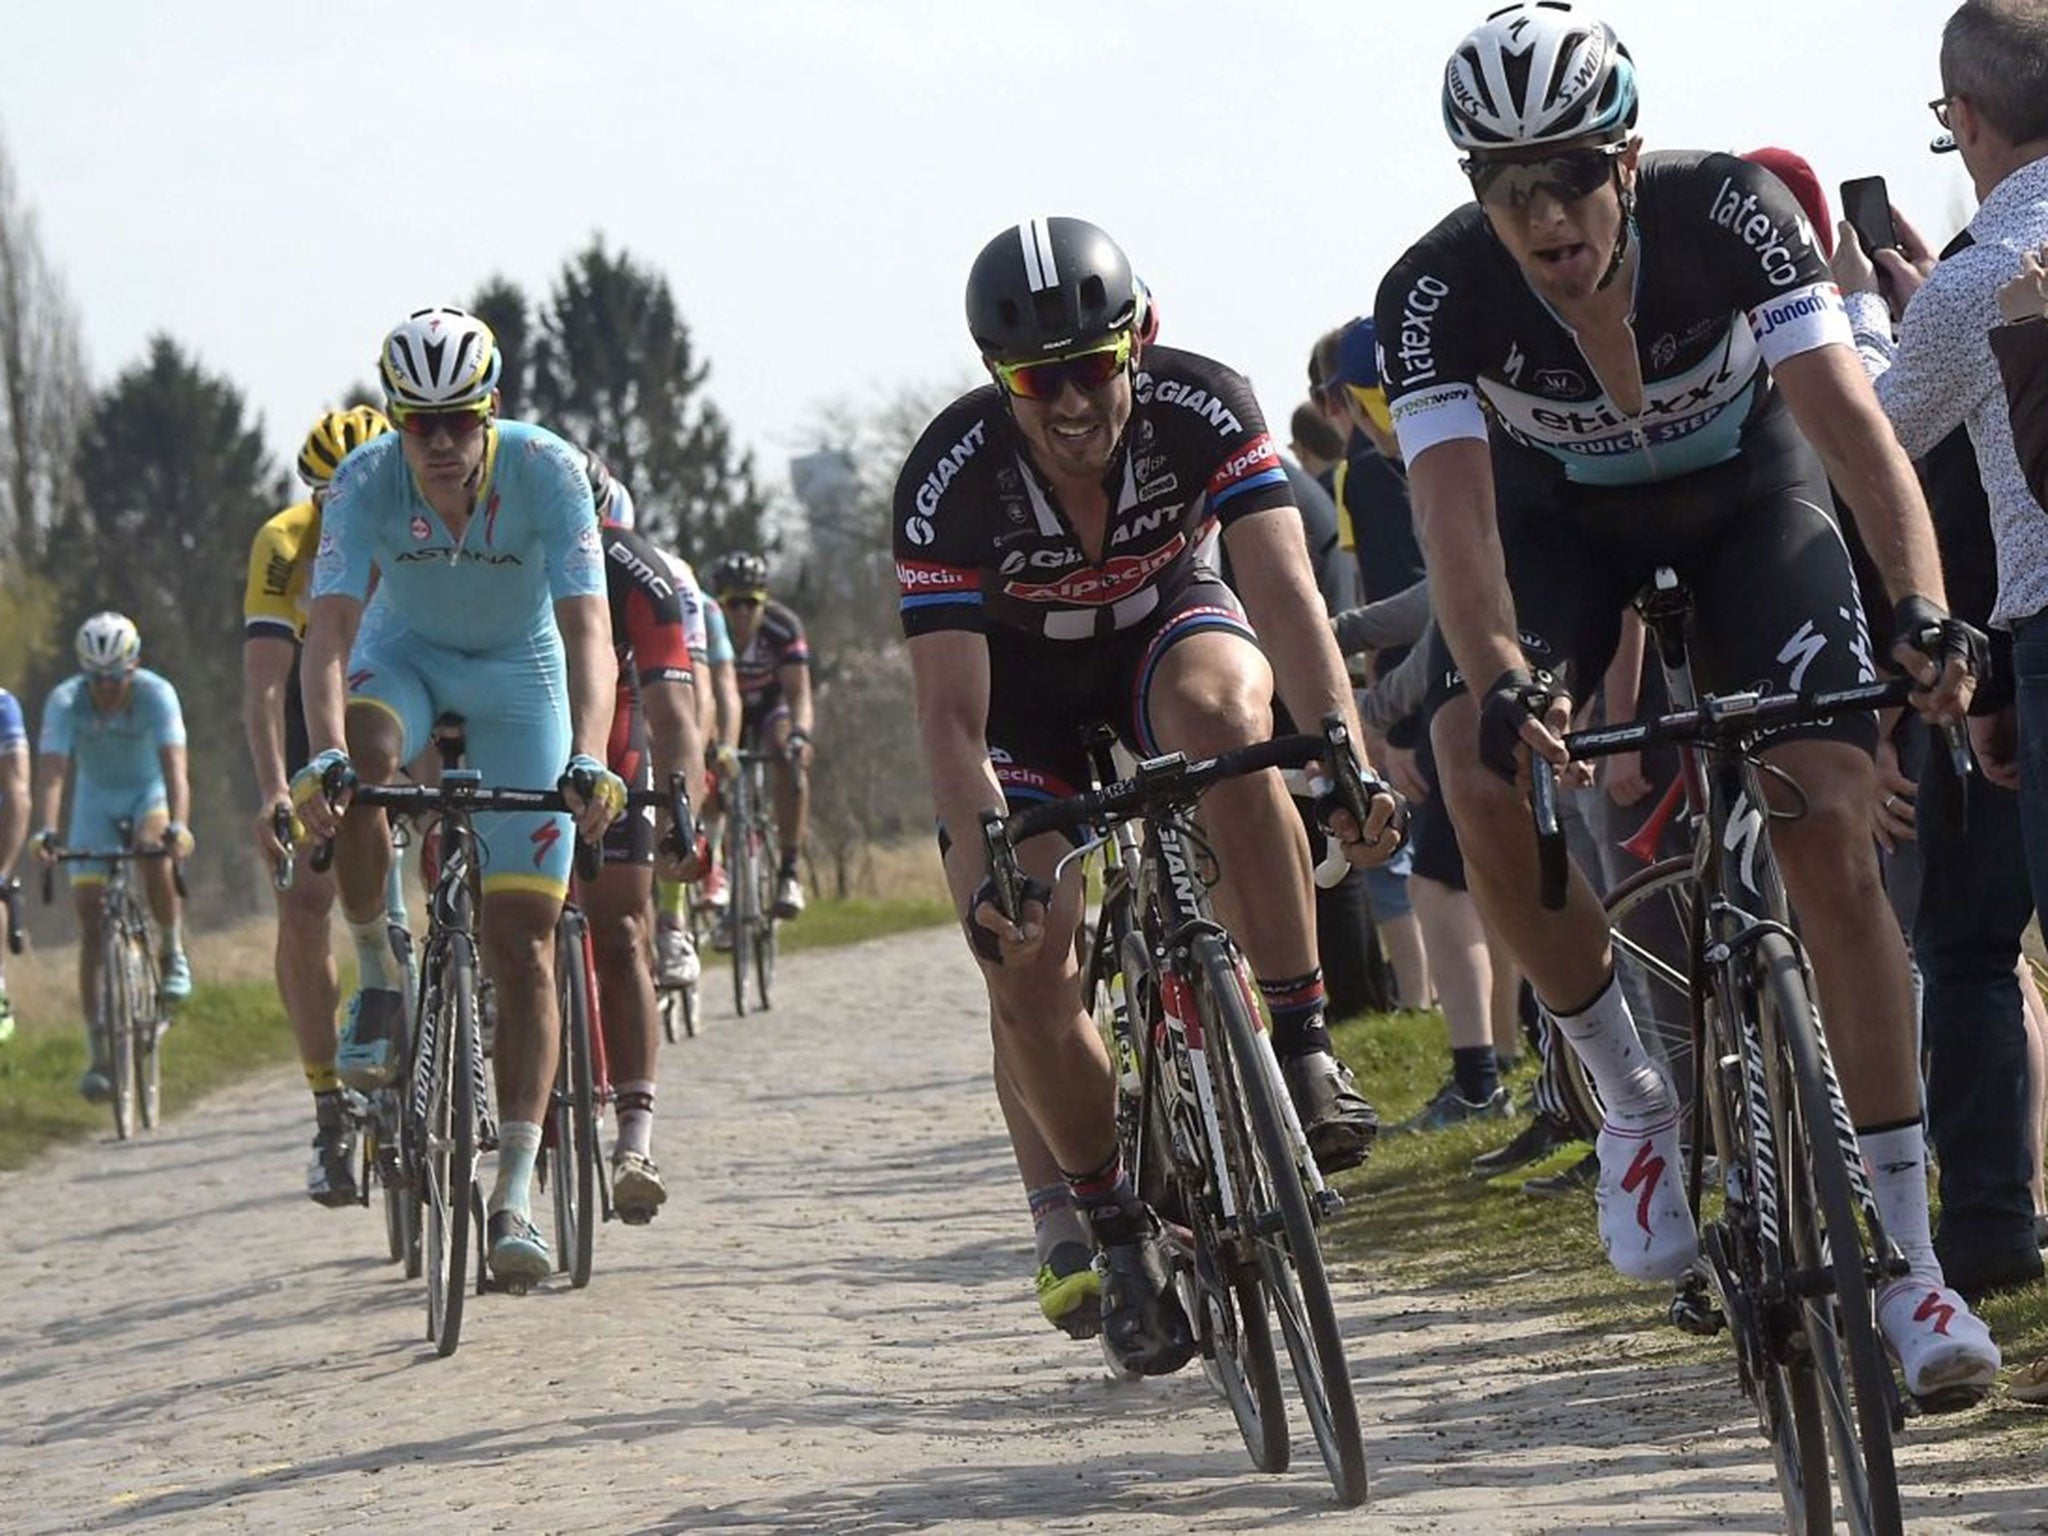 Team Giant-Alpecin German cyclist John Degenkolb rides to win the 113th edition of the Paris-Roubaix Paris-Roubaix one-day classic cycling race in Roubaix on April 12, 2015.